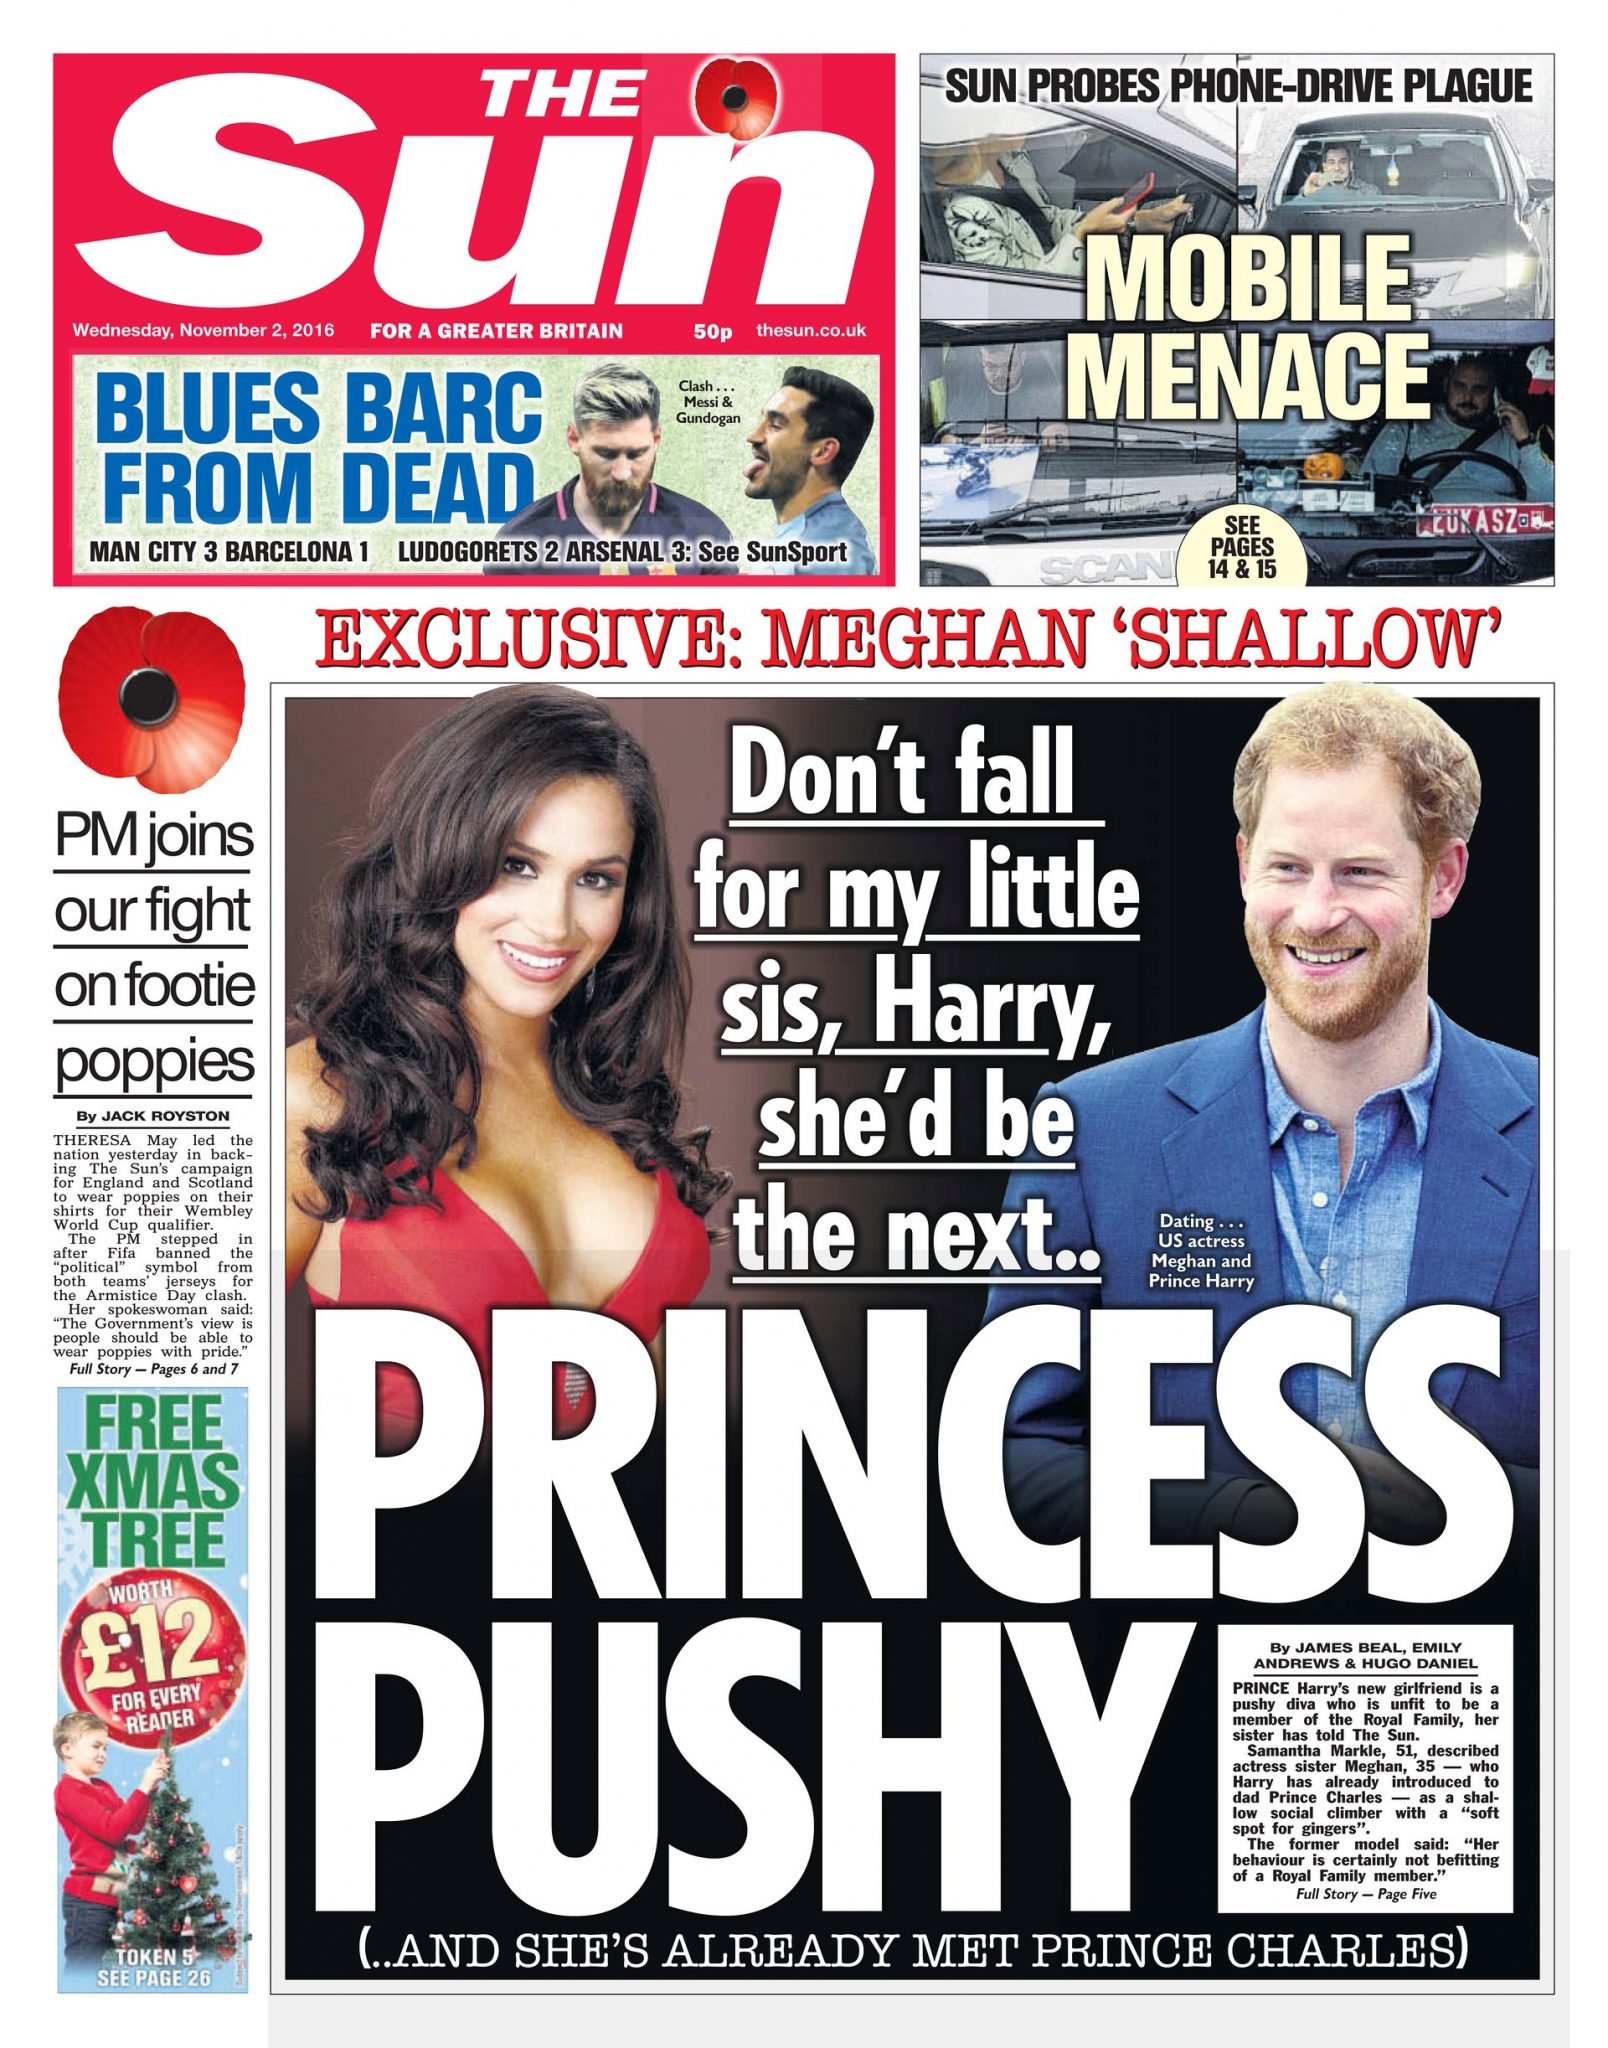 The Sun front page. Photograph: Sun